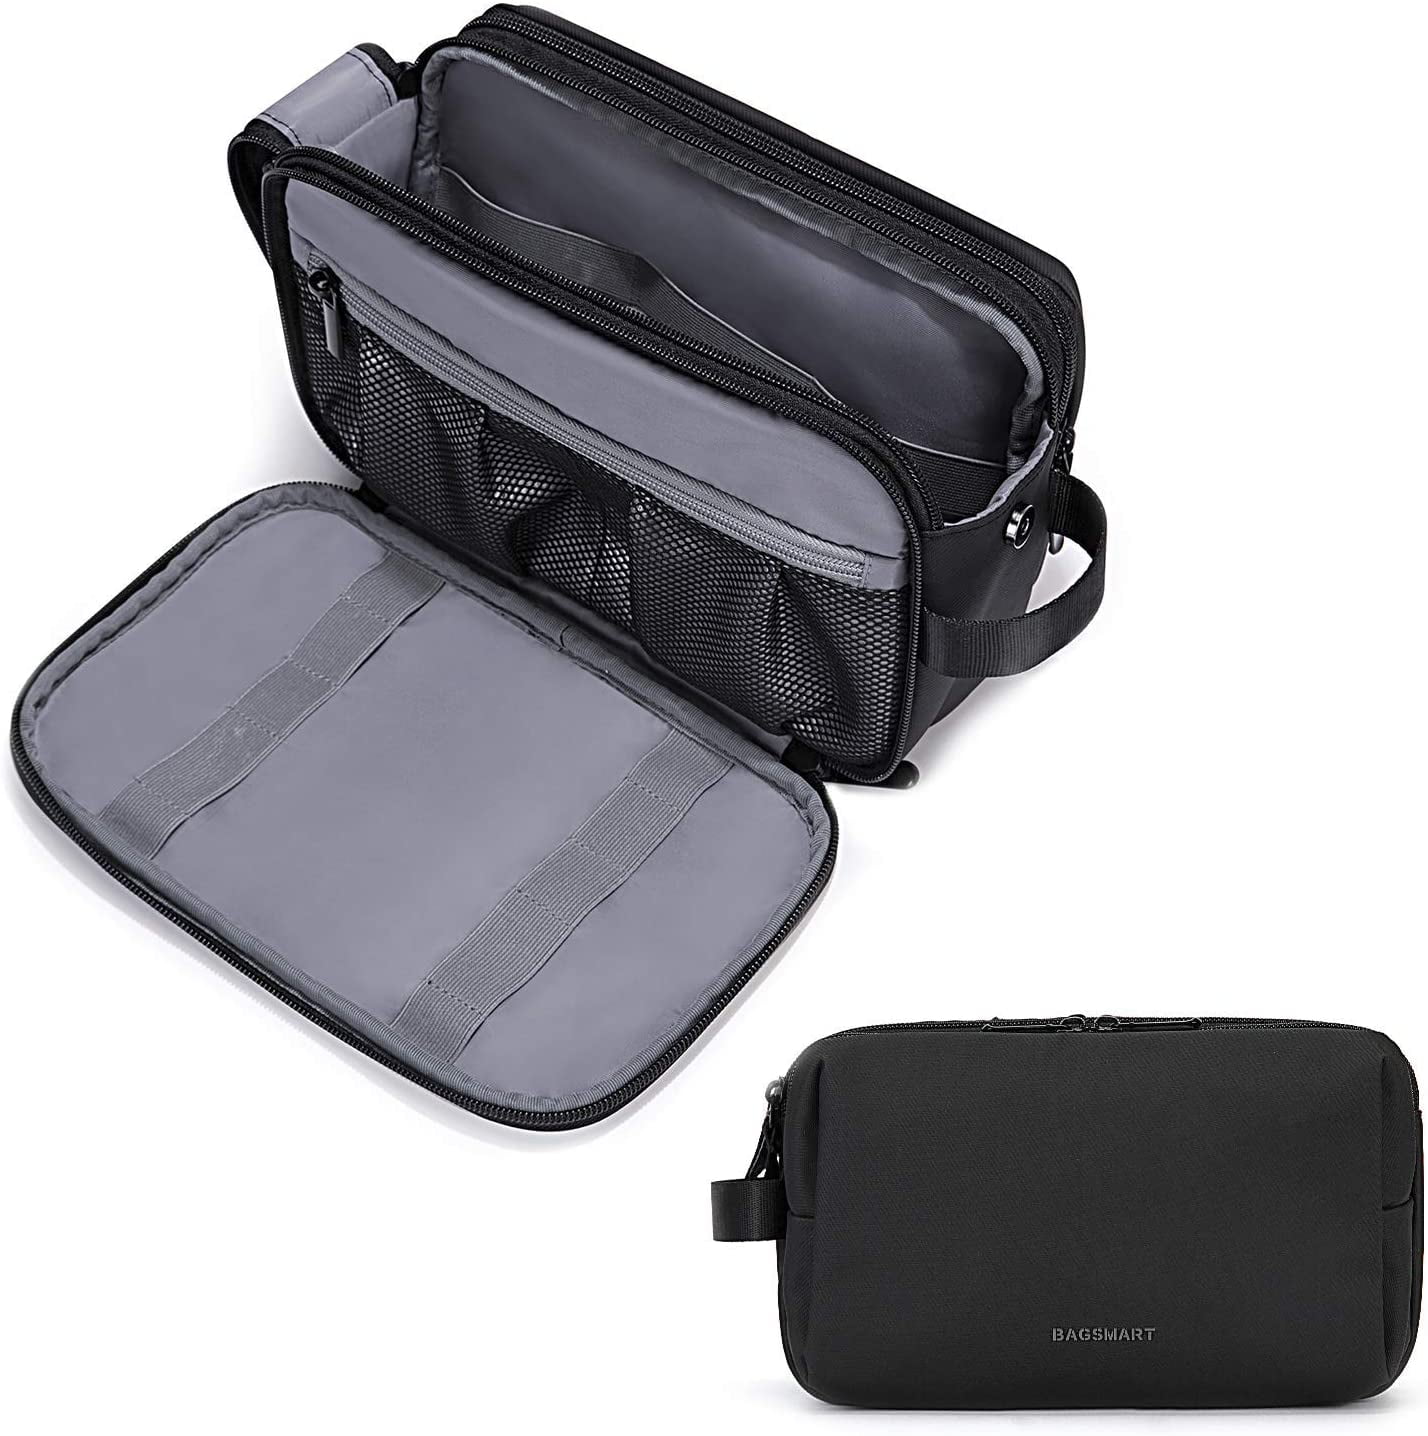 Travel Accessories Collection for Men